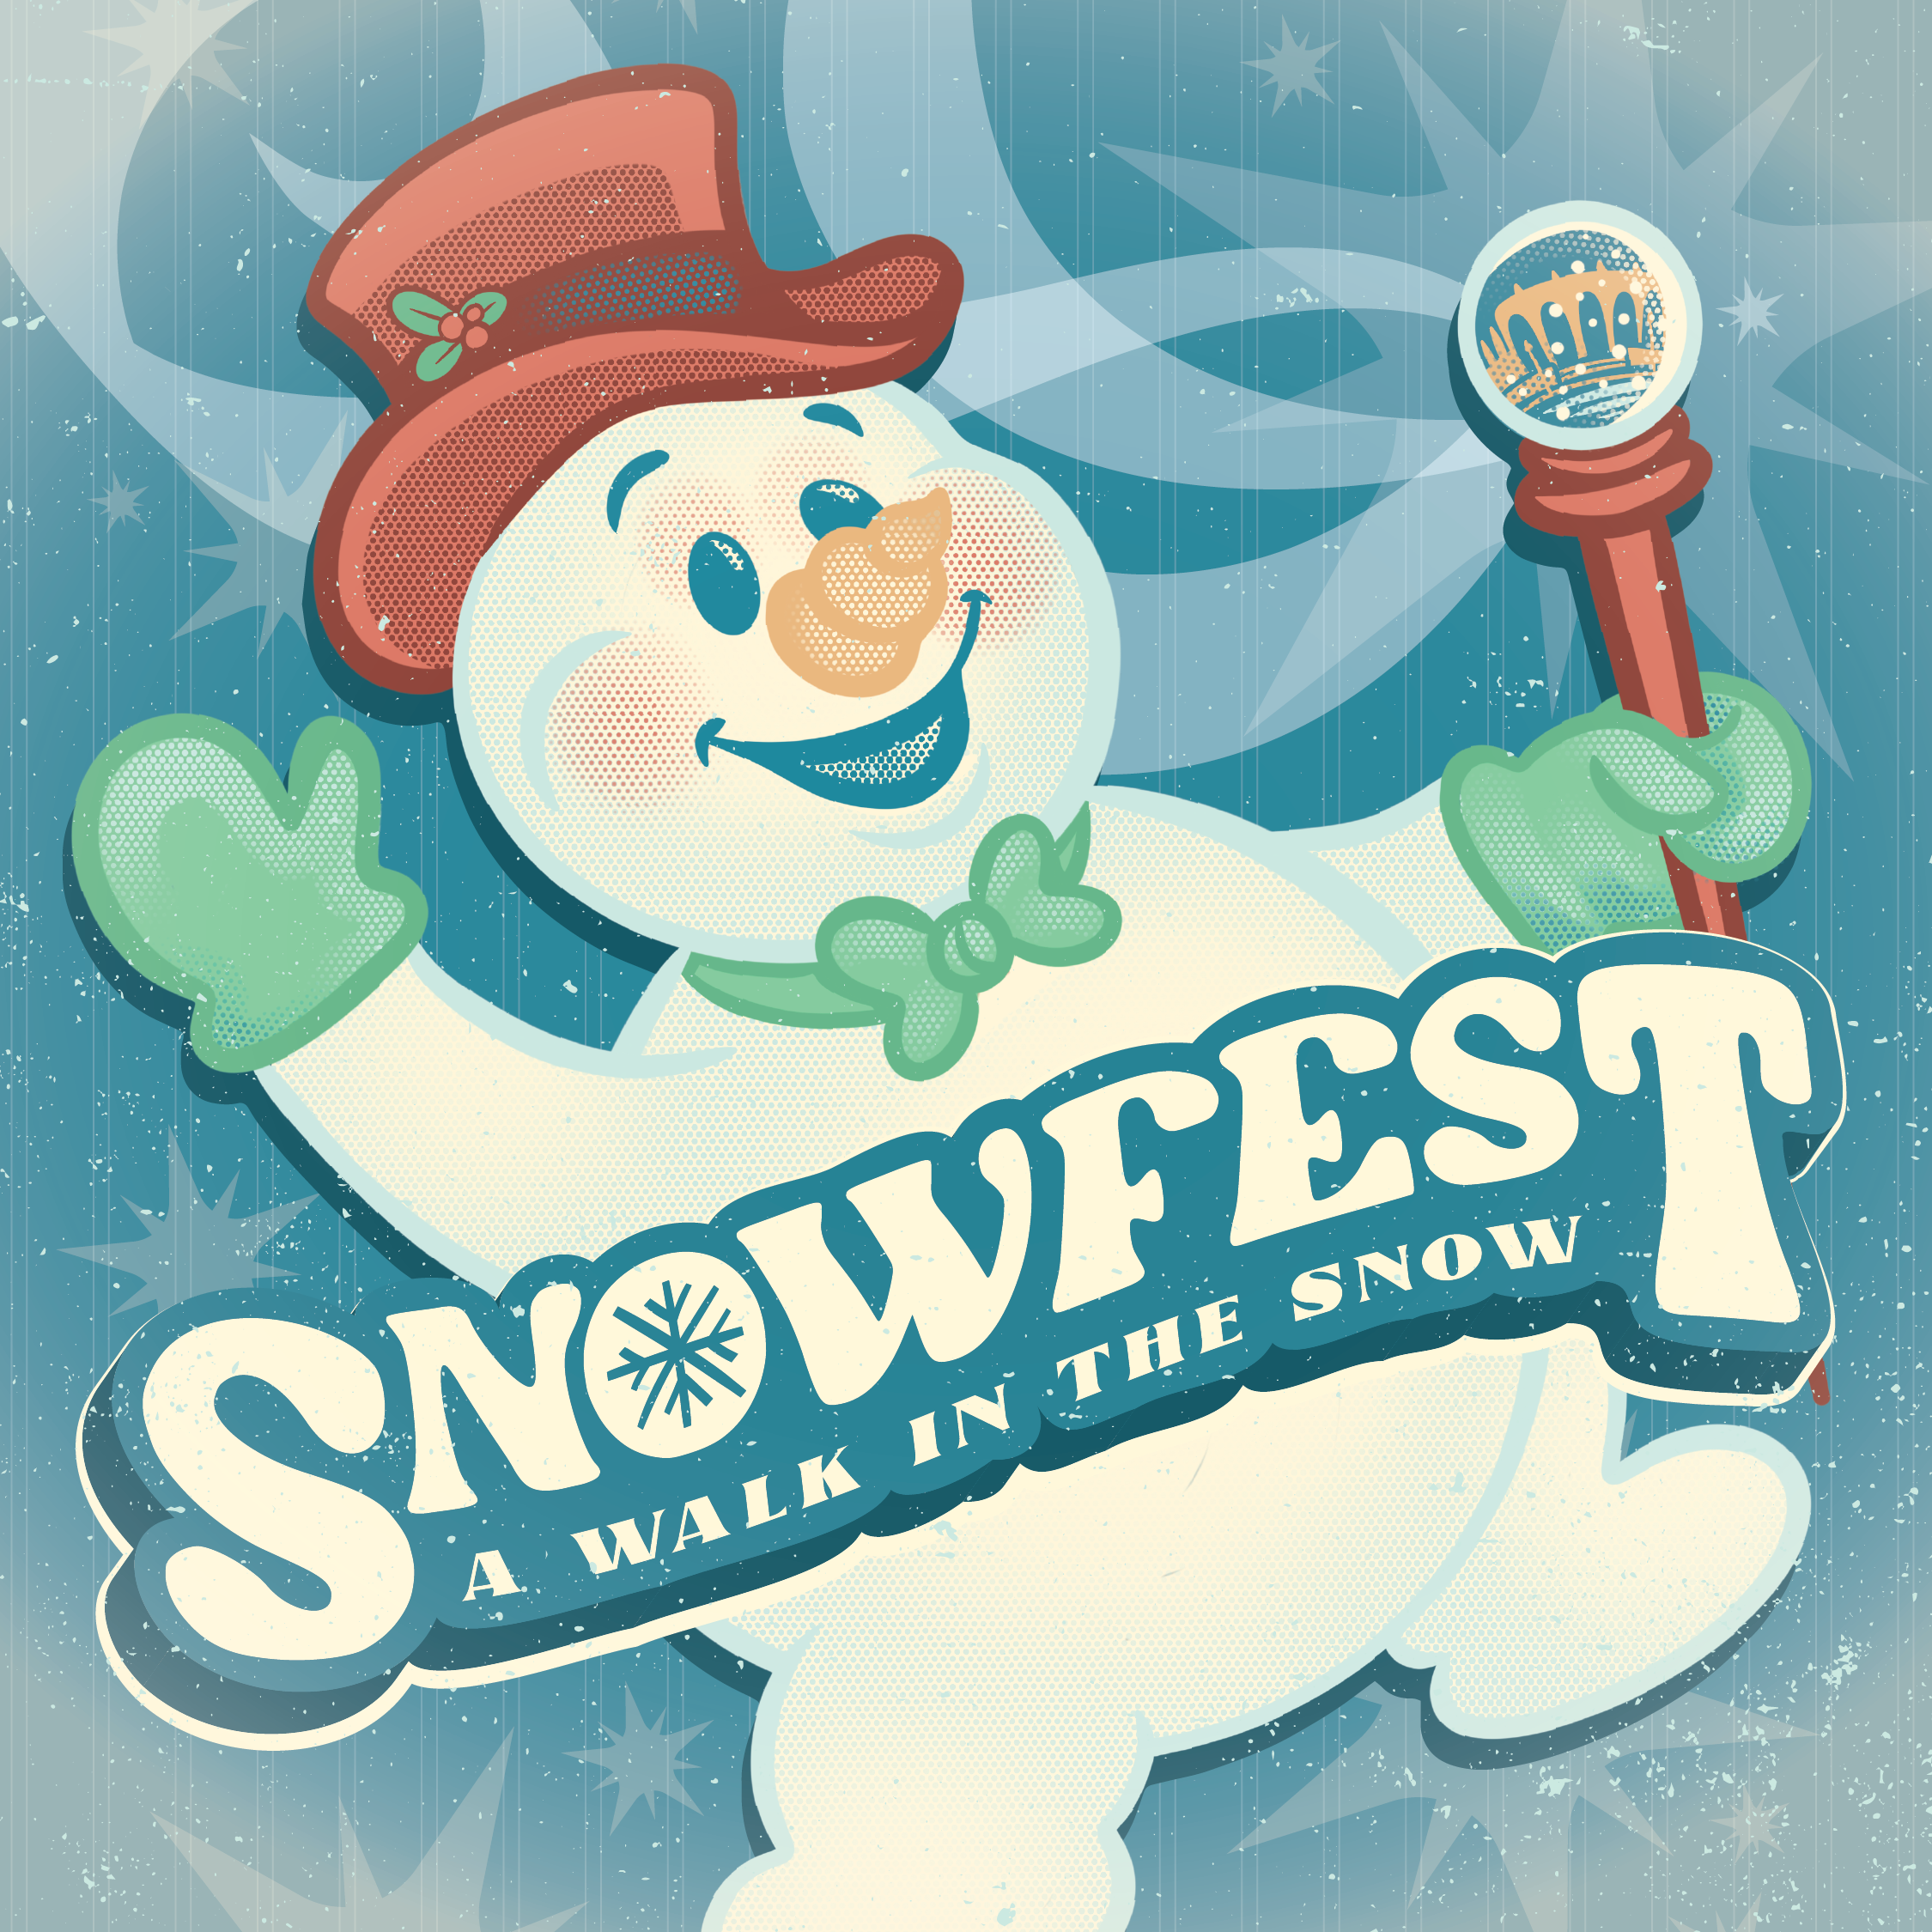 Snowfest event graphic: Snowman with text in the foreground - Snowfest, a walk the Snow.